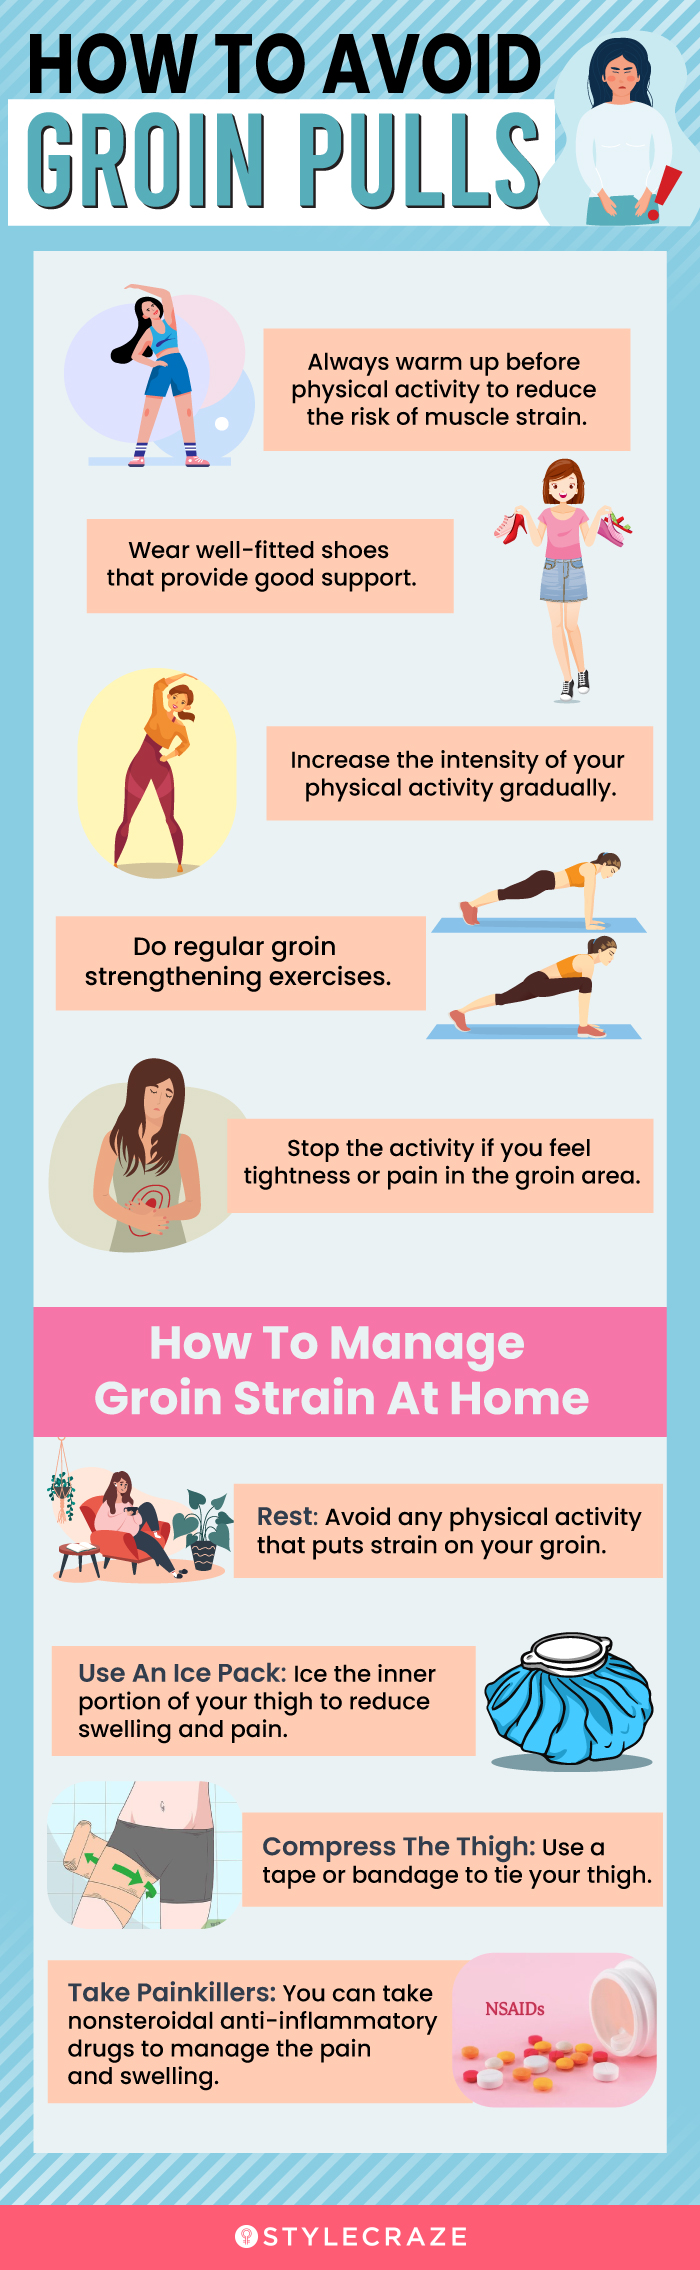 how to avoid groin pulls (infographic)